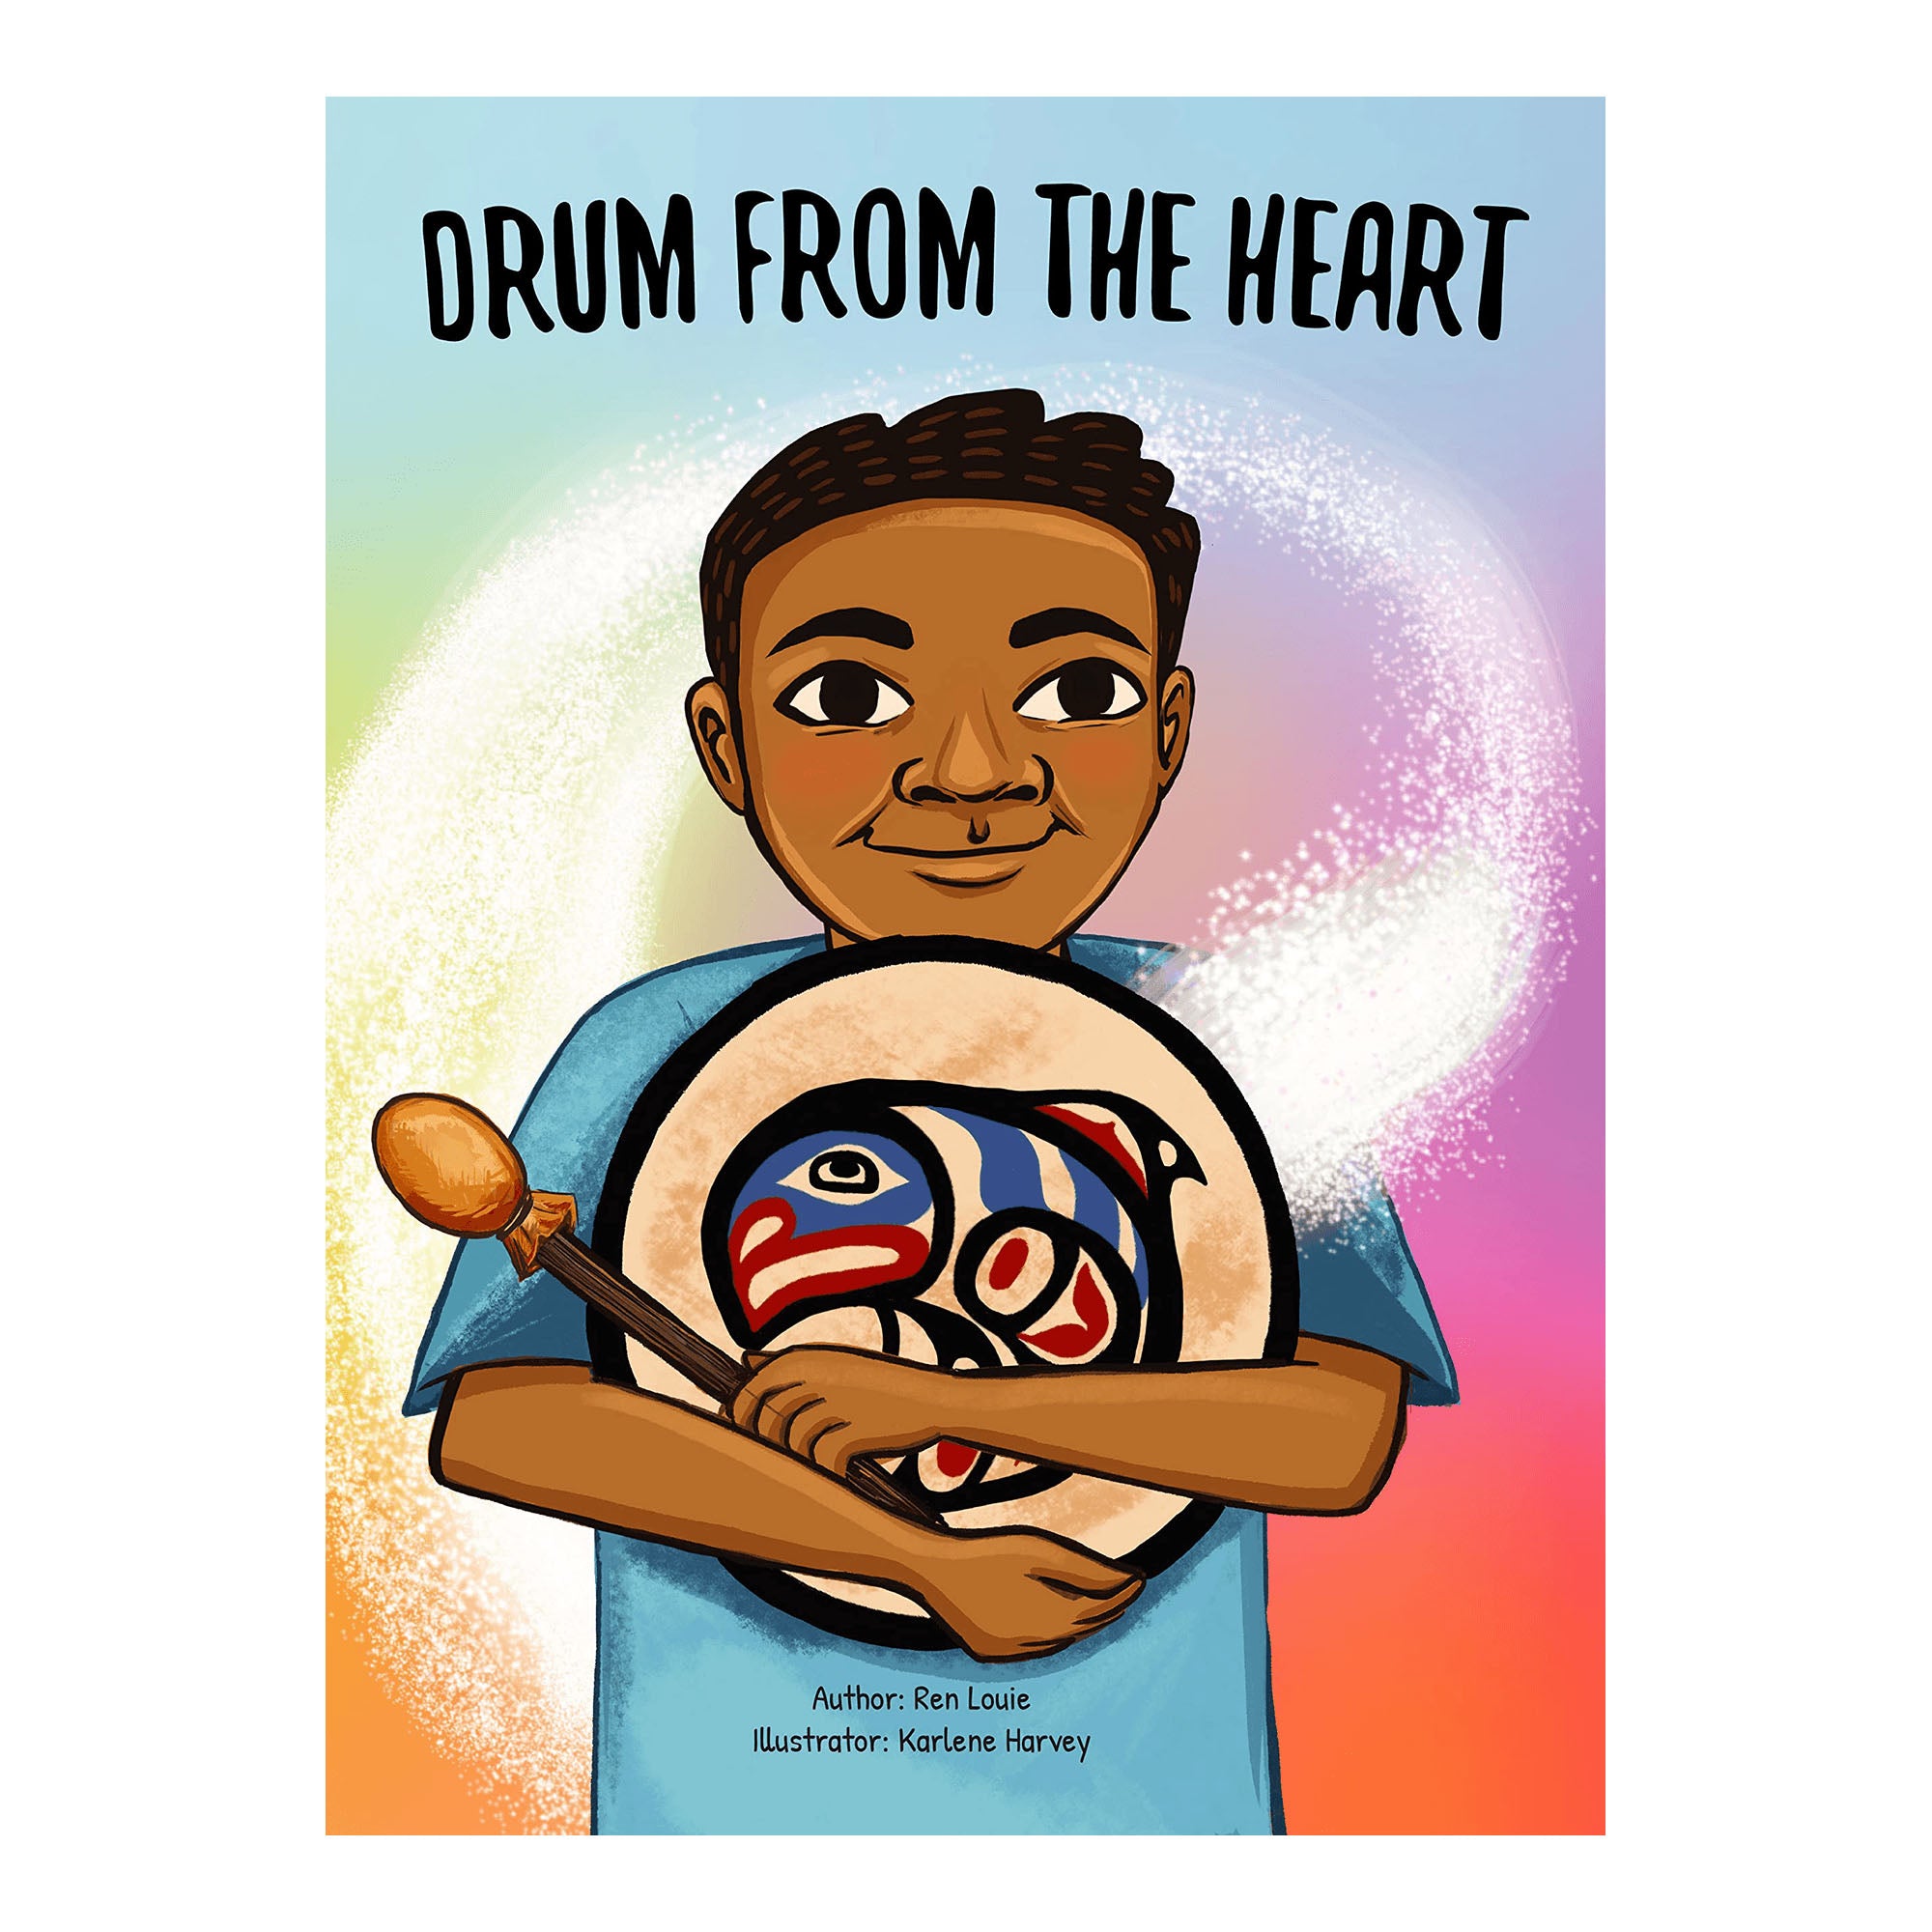 DRUM FROM THE HEART